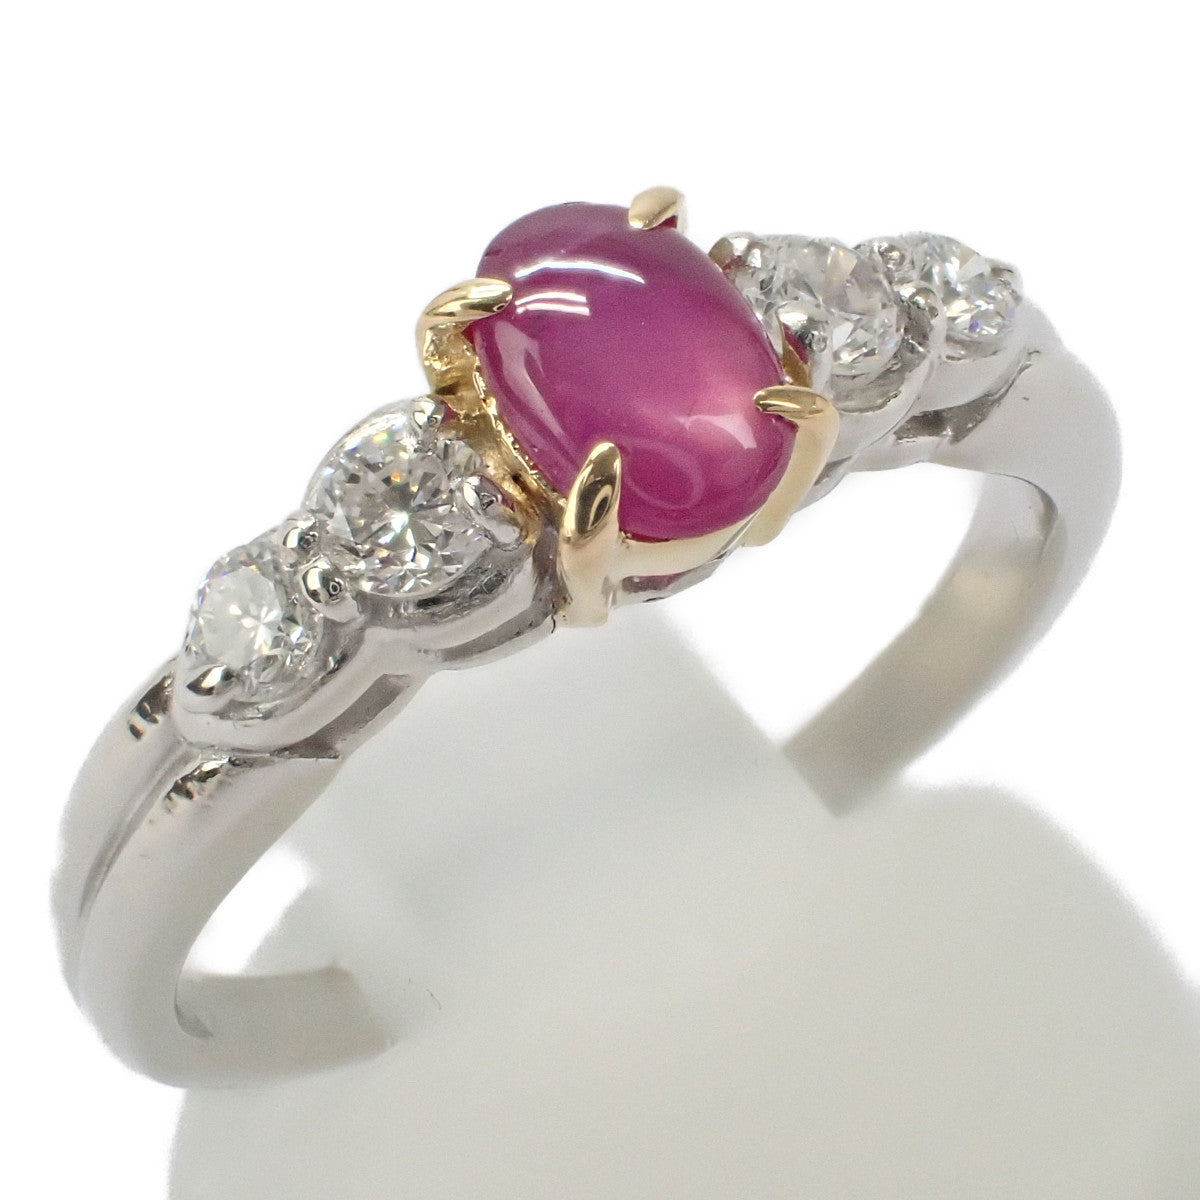 Luxurious Women's Size 13 Ring in Platinum PT900/Yellow Gold K18 with Ruby and Diamond, Silver